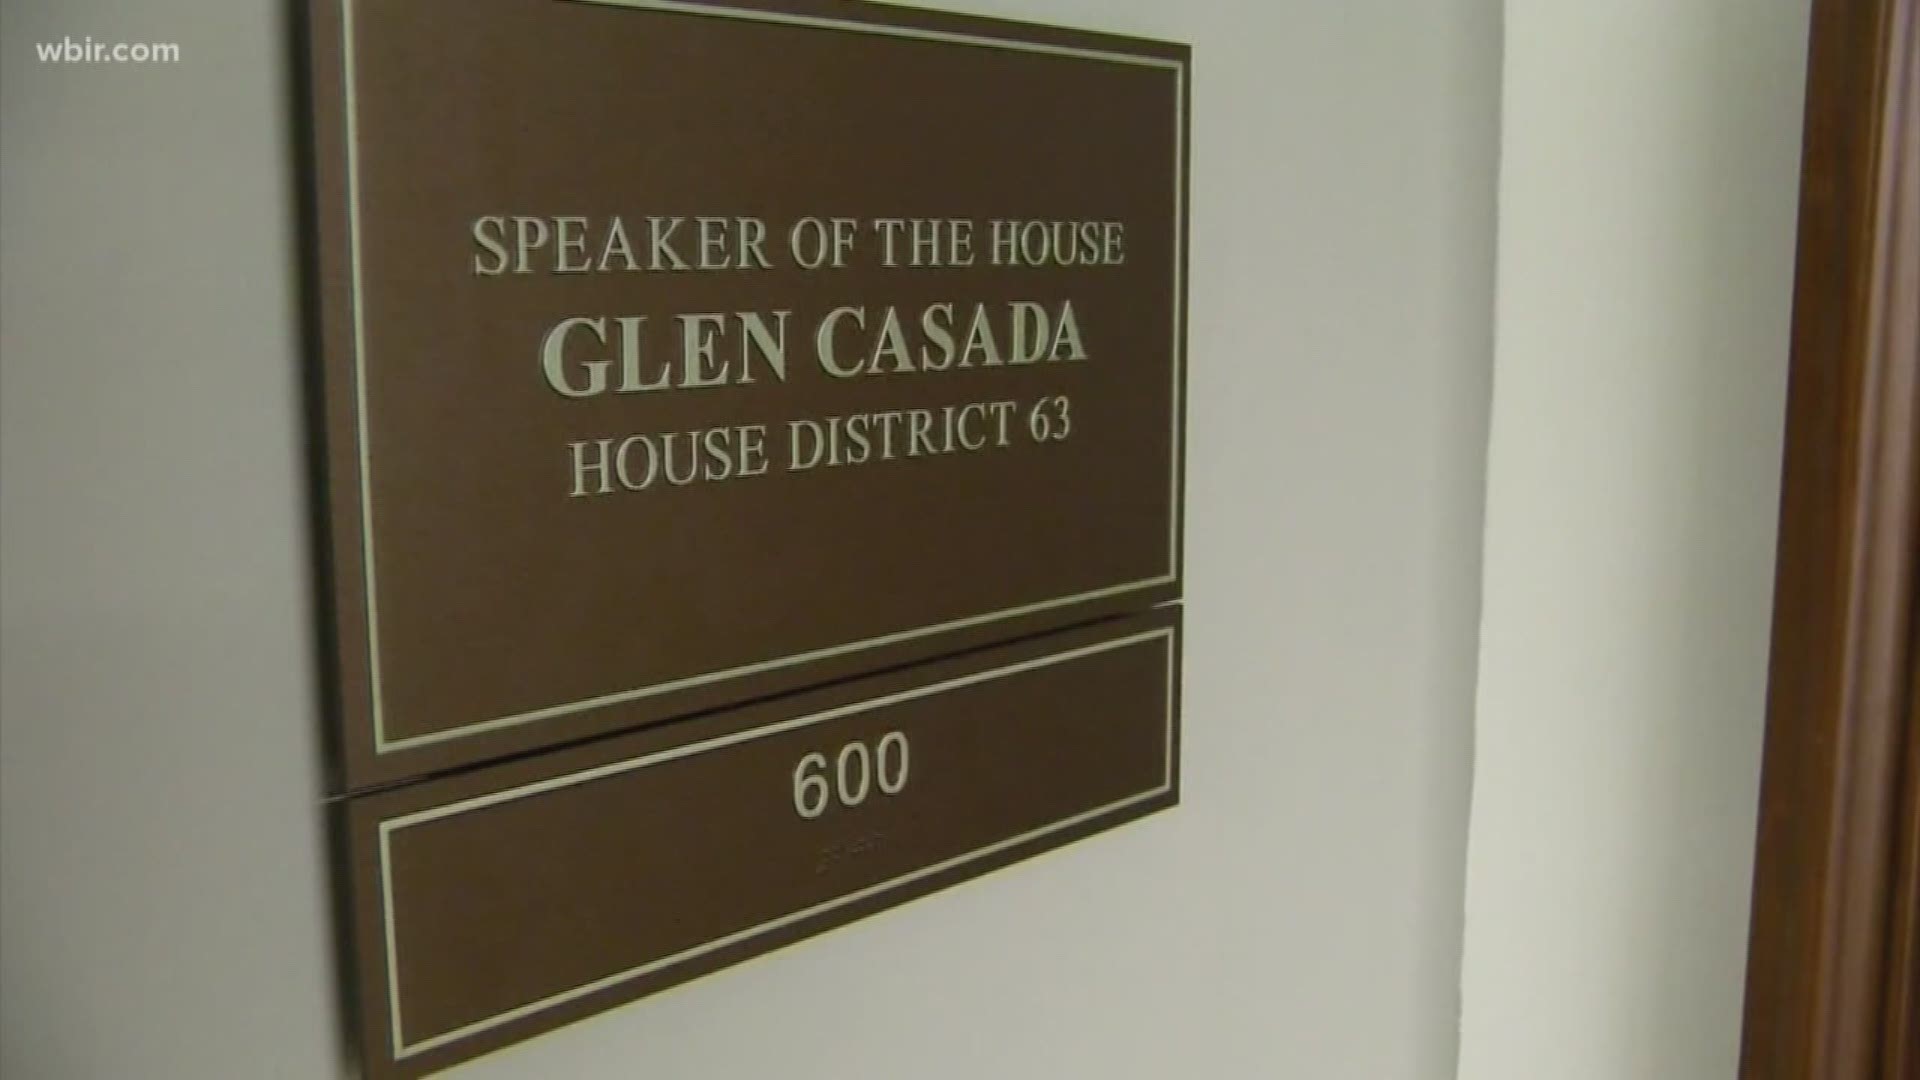 Tennessee House Republicans will meet to discuss the controversies surrounding House Speaker Glen Casada. He is facing several allegations, including sending sexist text messages and listening in on private meetings.